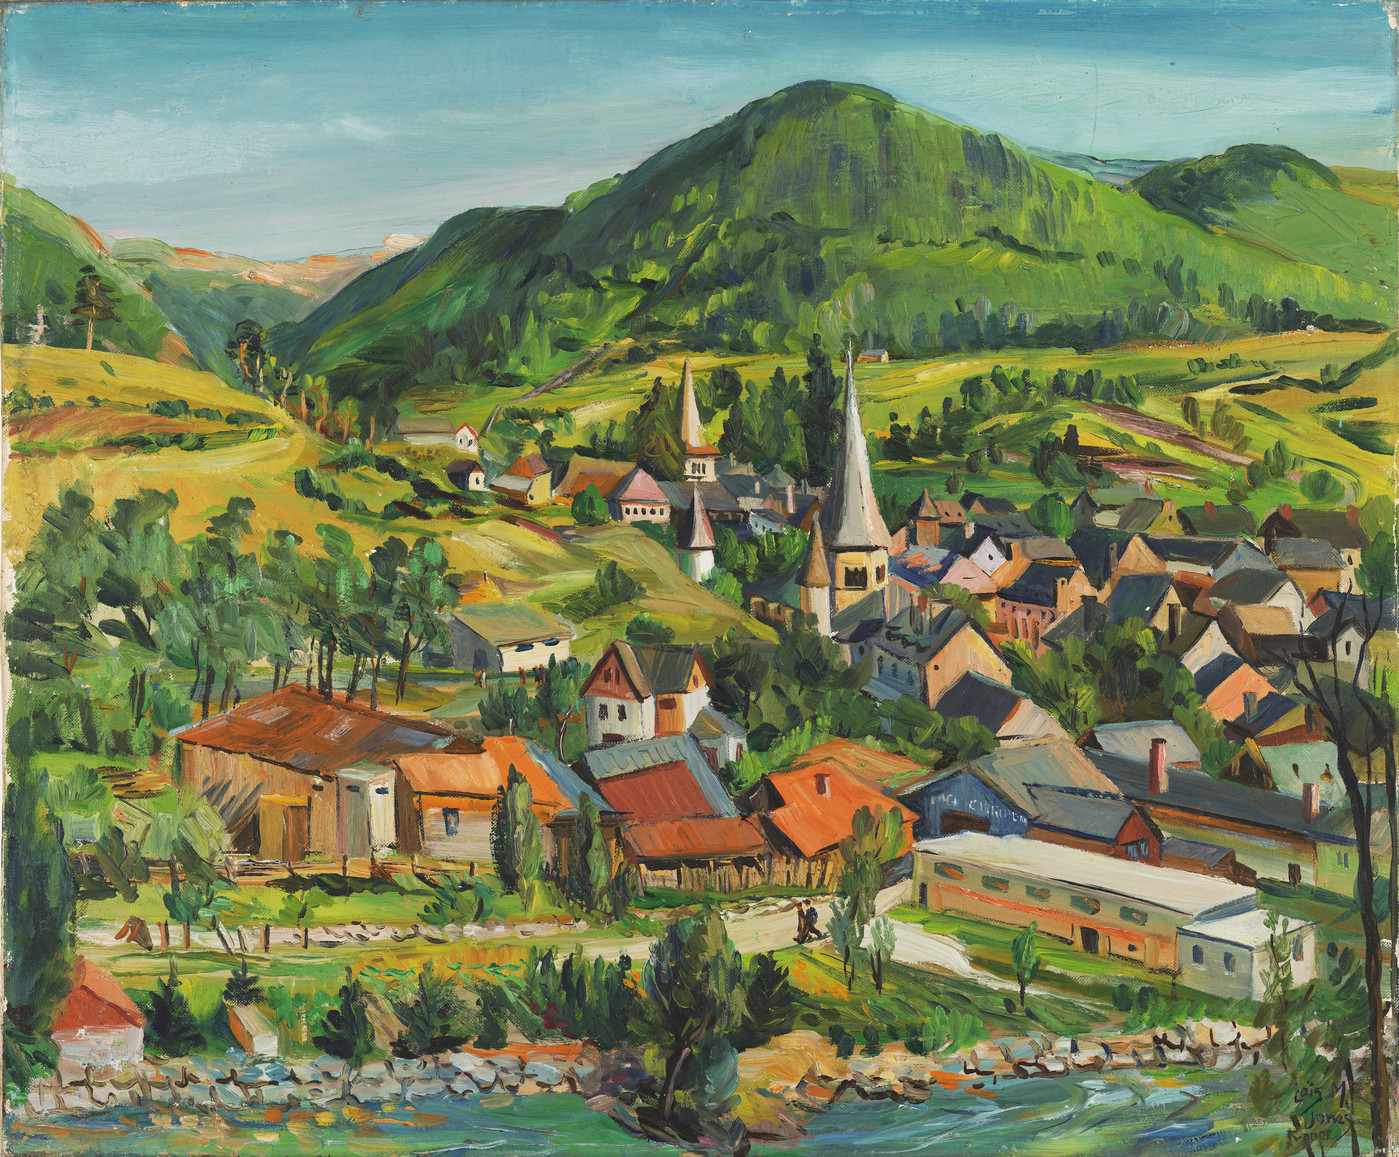 Painting of a village with a body of water in the foreground and green mountains in the backgroud. The village is a cluster of small houses with a few spires marking churches.